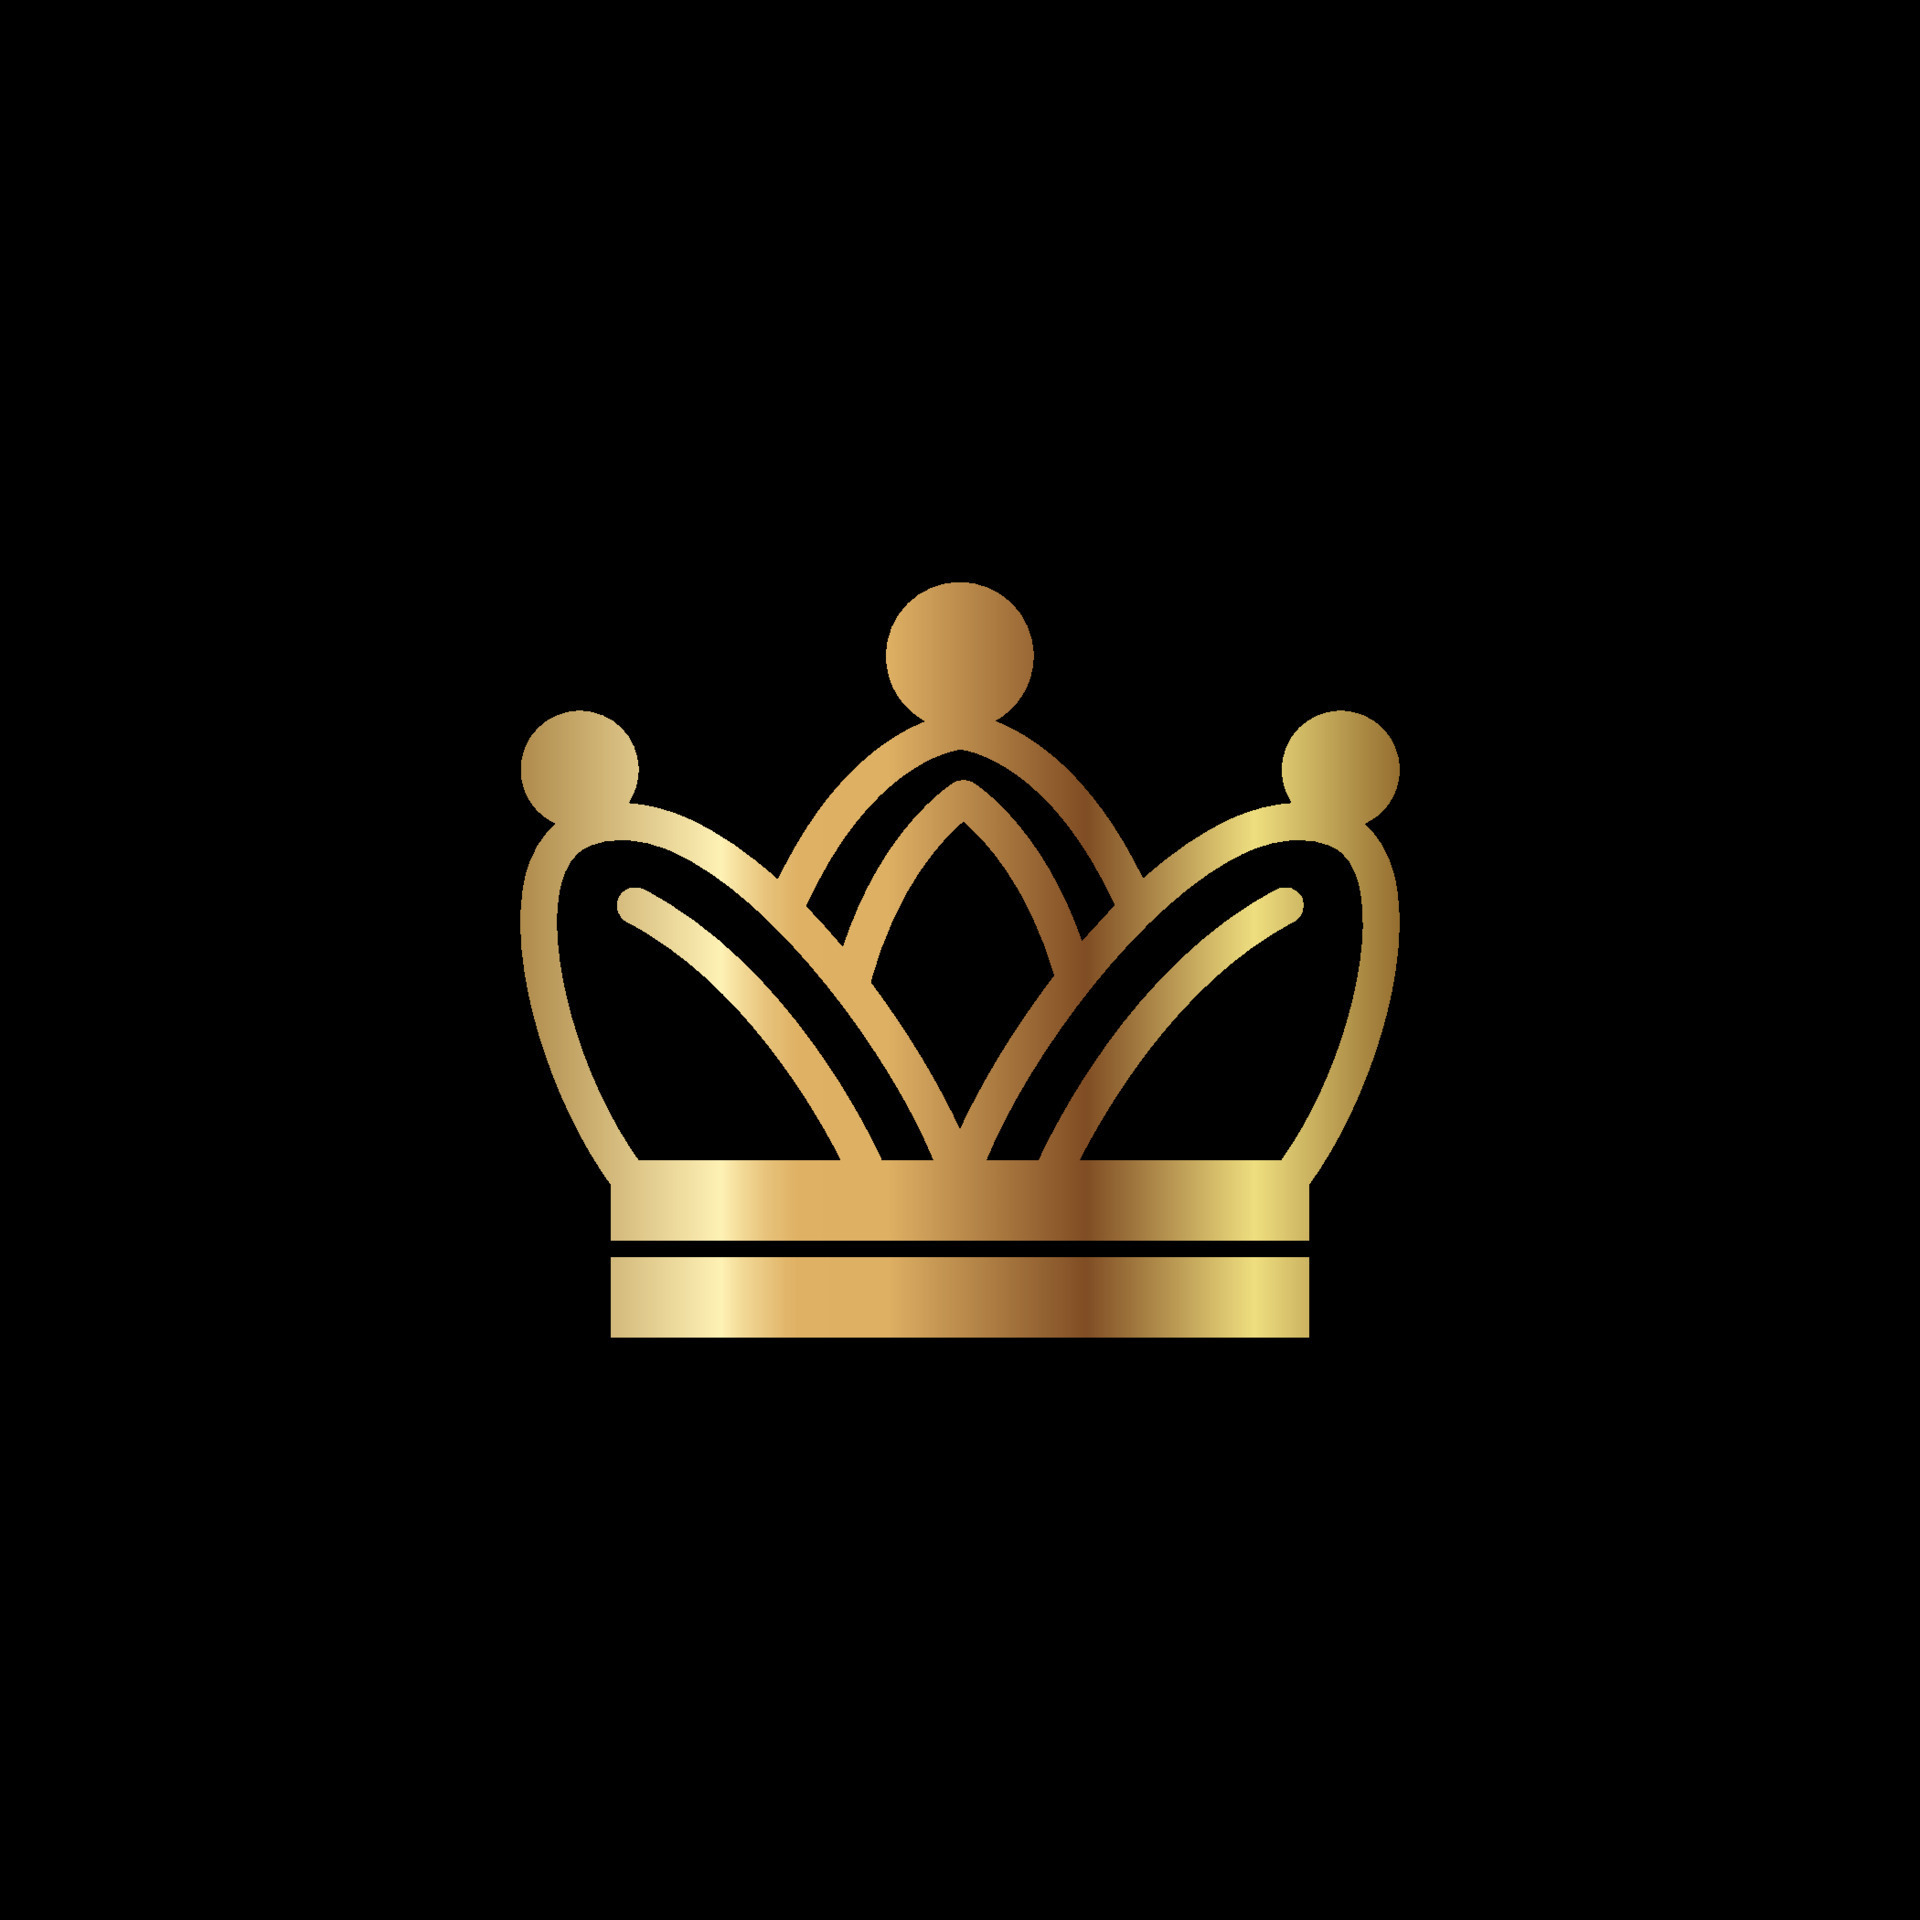 Crown icon. Crown vector illustration with golden color isolated on black  background, suitable for icon, logo, or any design element using crown  shape 7372198 Vector Art at Vecteezy